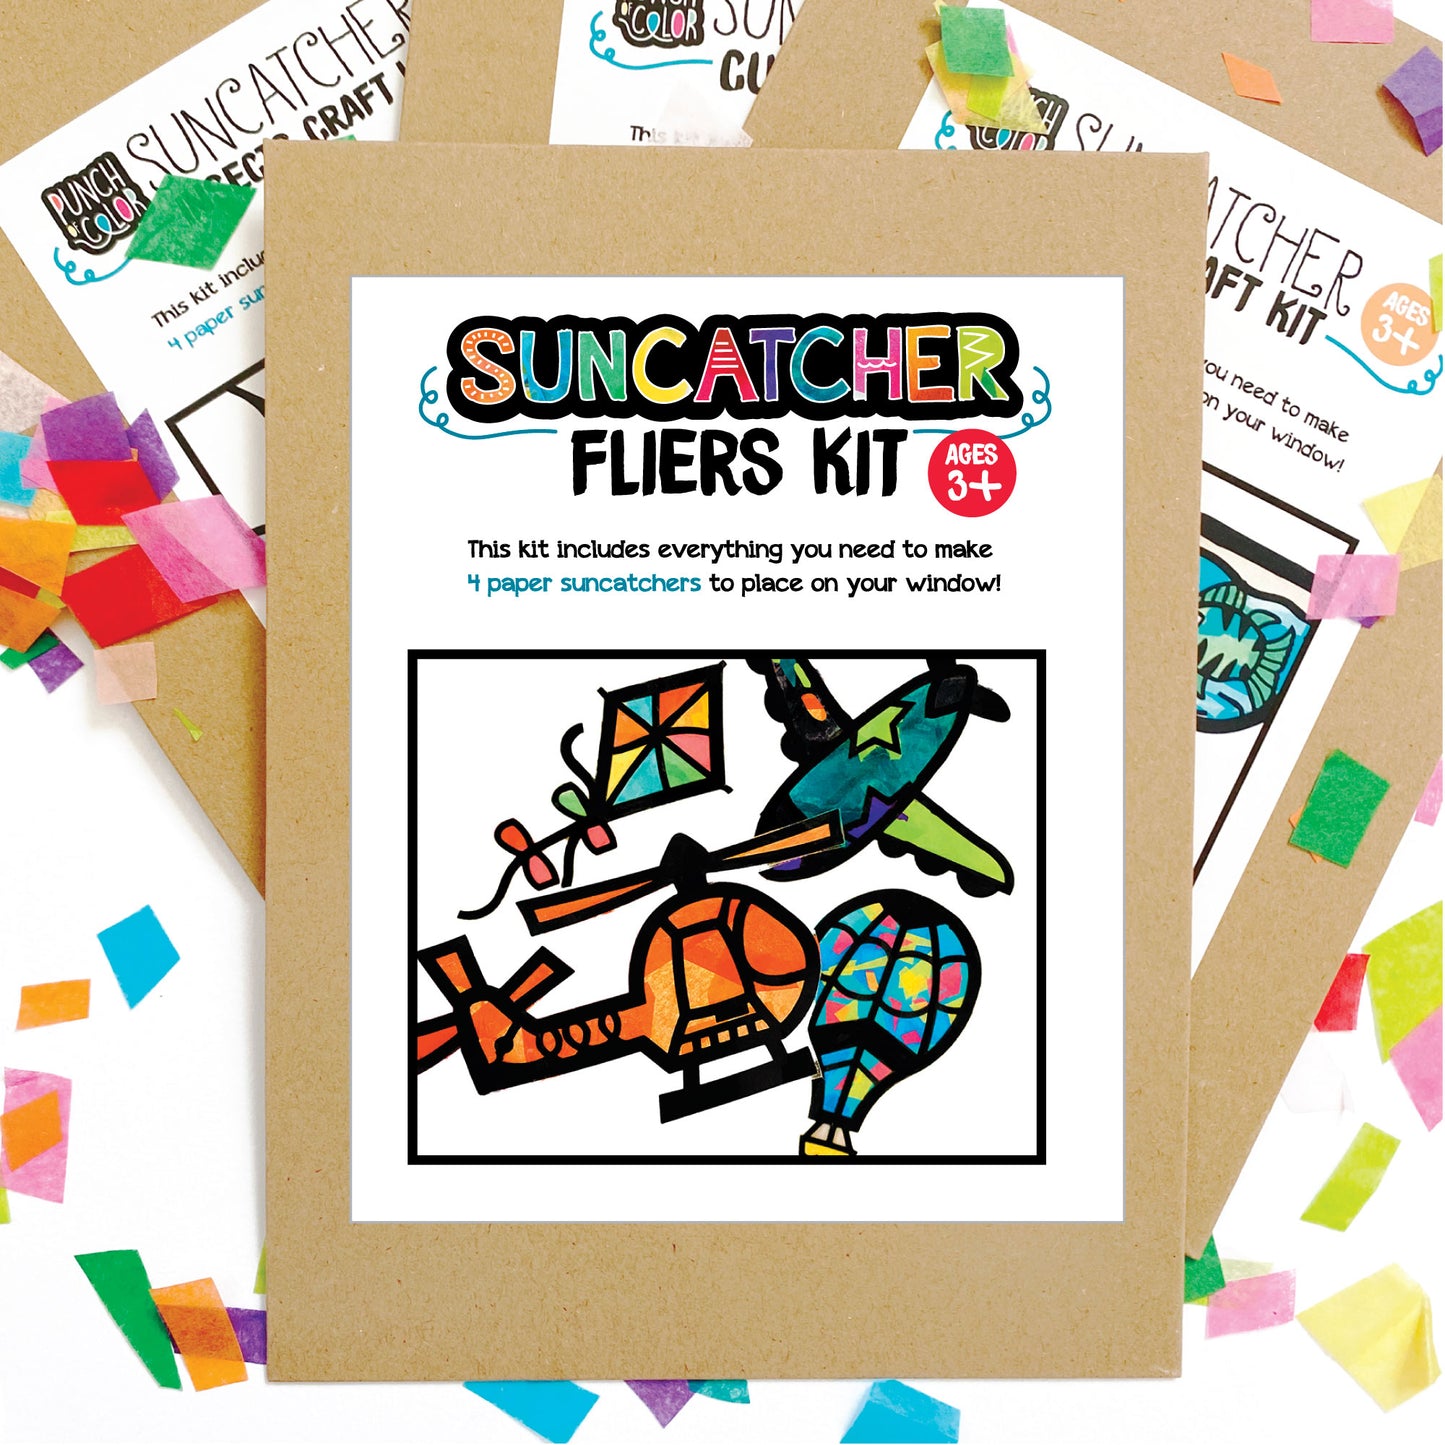 Things that fly arts and crafts suncatcher kit for kids